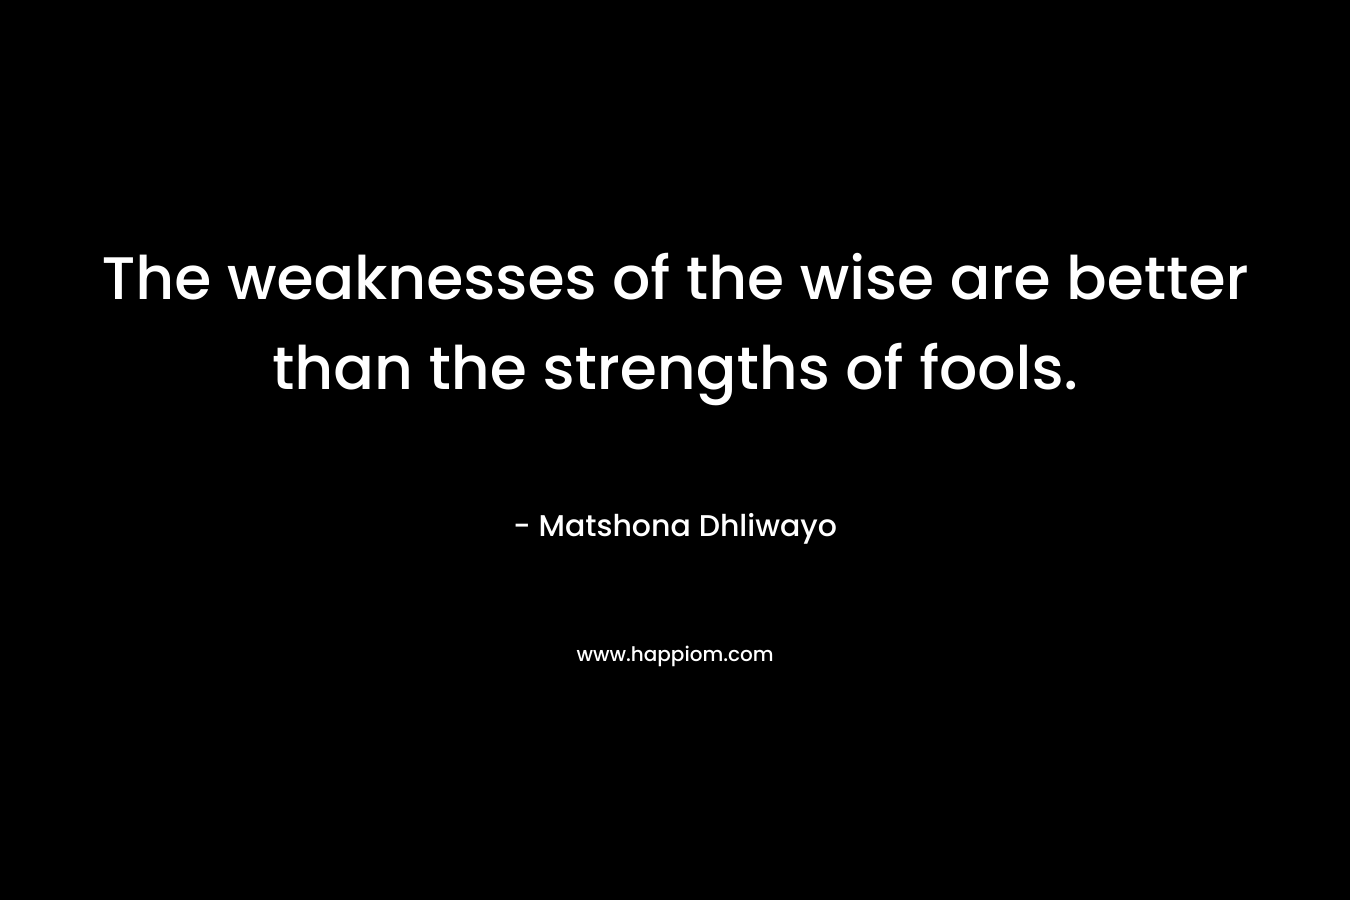 The weaknesses of the wise are better than the strengths of fools.